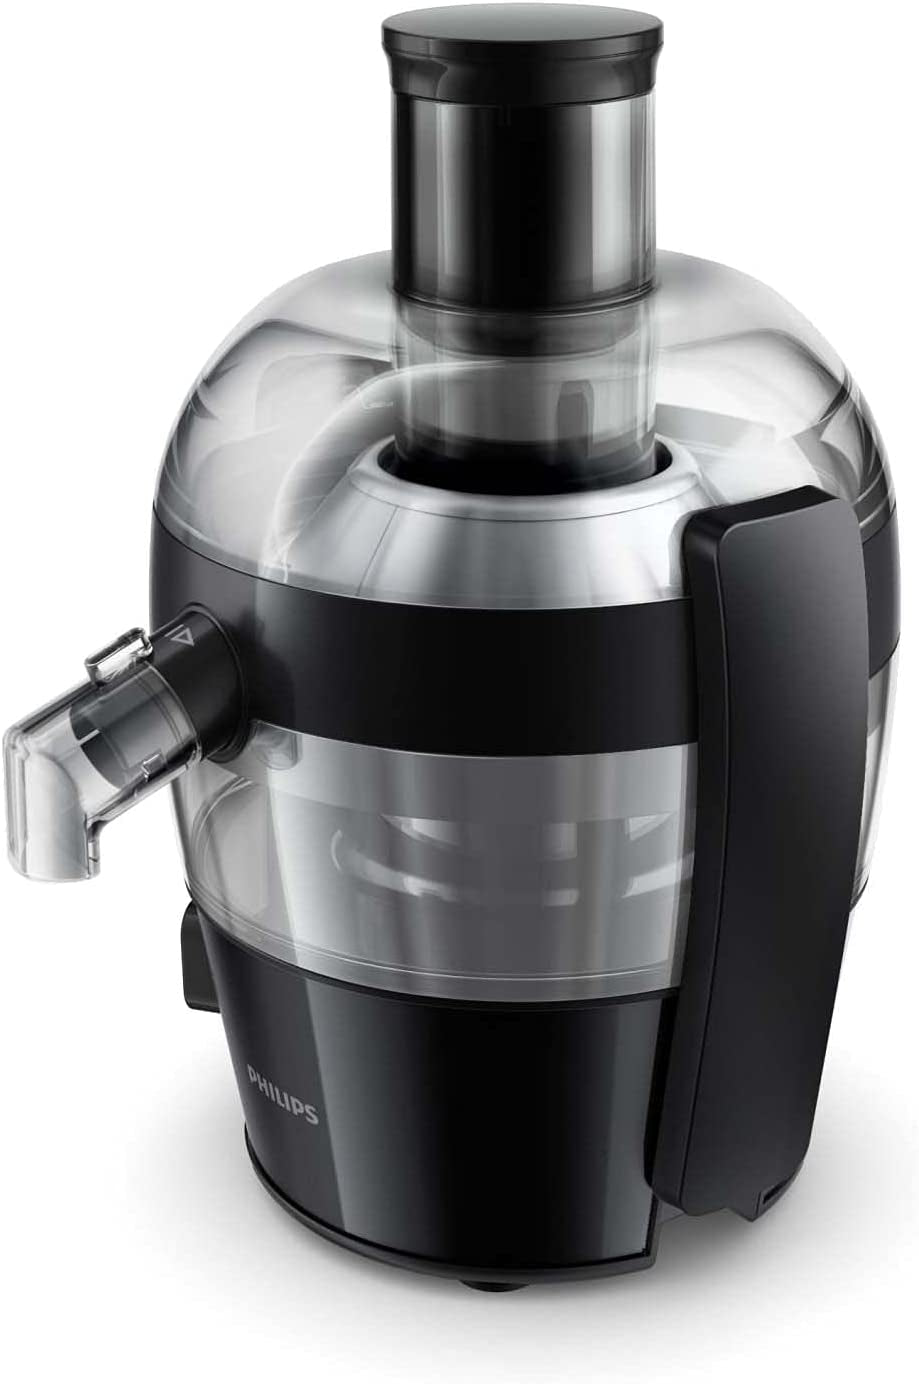 Philips Viva Collection Compact Juicer with Quick Clean Technology, 1.5 Litre, 500 W - Black - HR1832/01